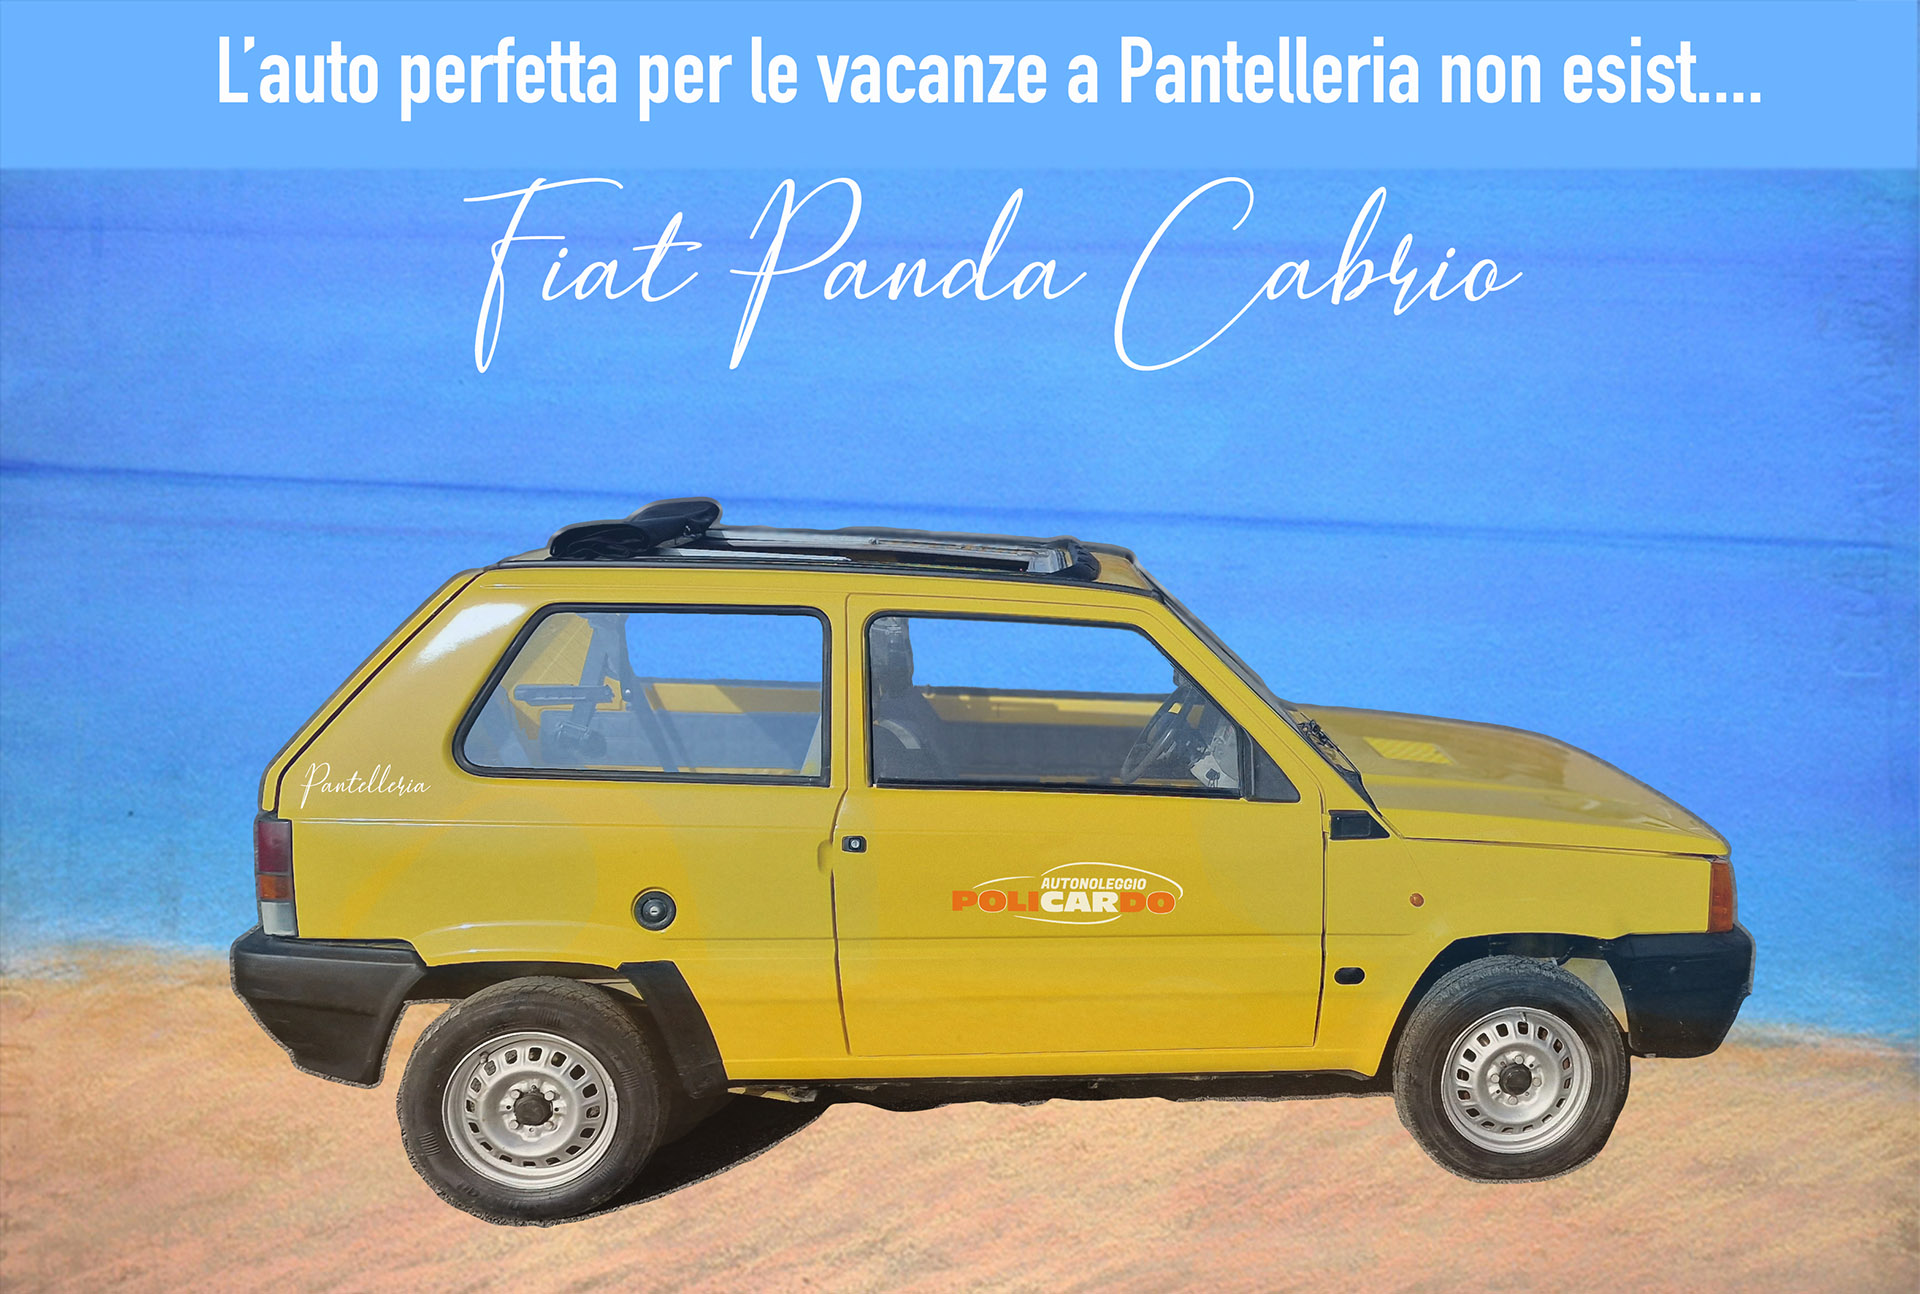 The perfect car for Pantelleria does not exis...